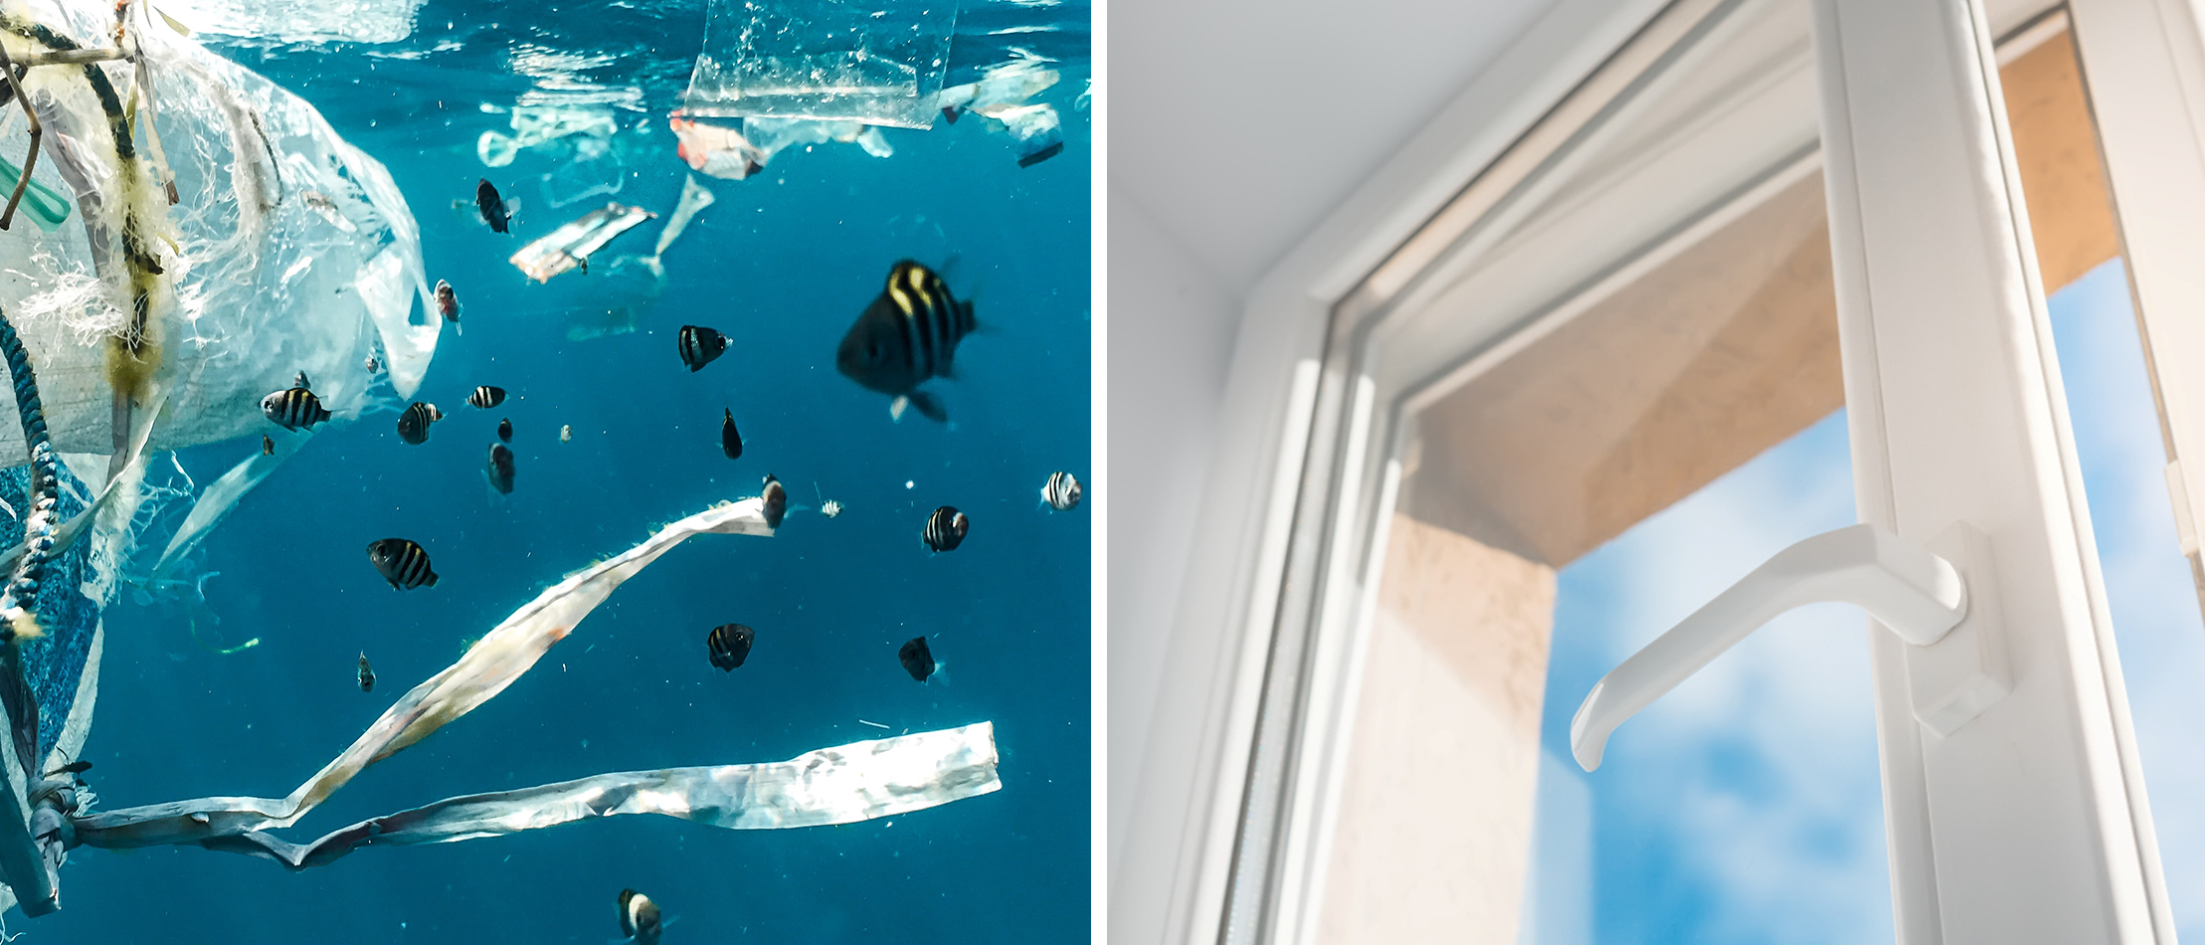 Plastic swims in the ocean and sustainable PVC window frame